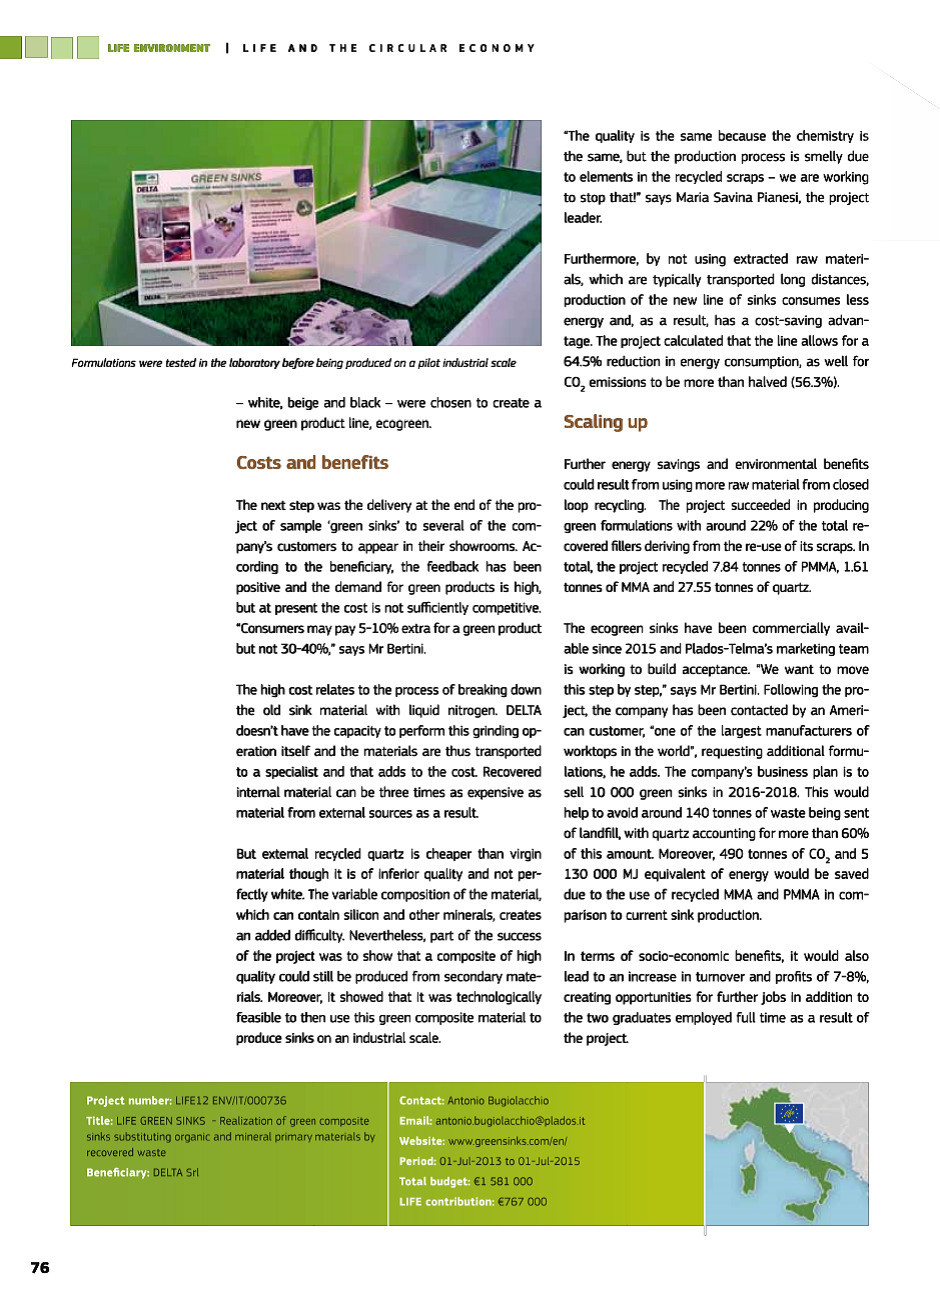 THE GREEN SINKS PROJECT IN THE EUROPEAN PUBLICATION "LIFE AND THE CIRCULAR ECONOMY" 3